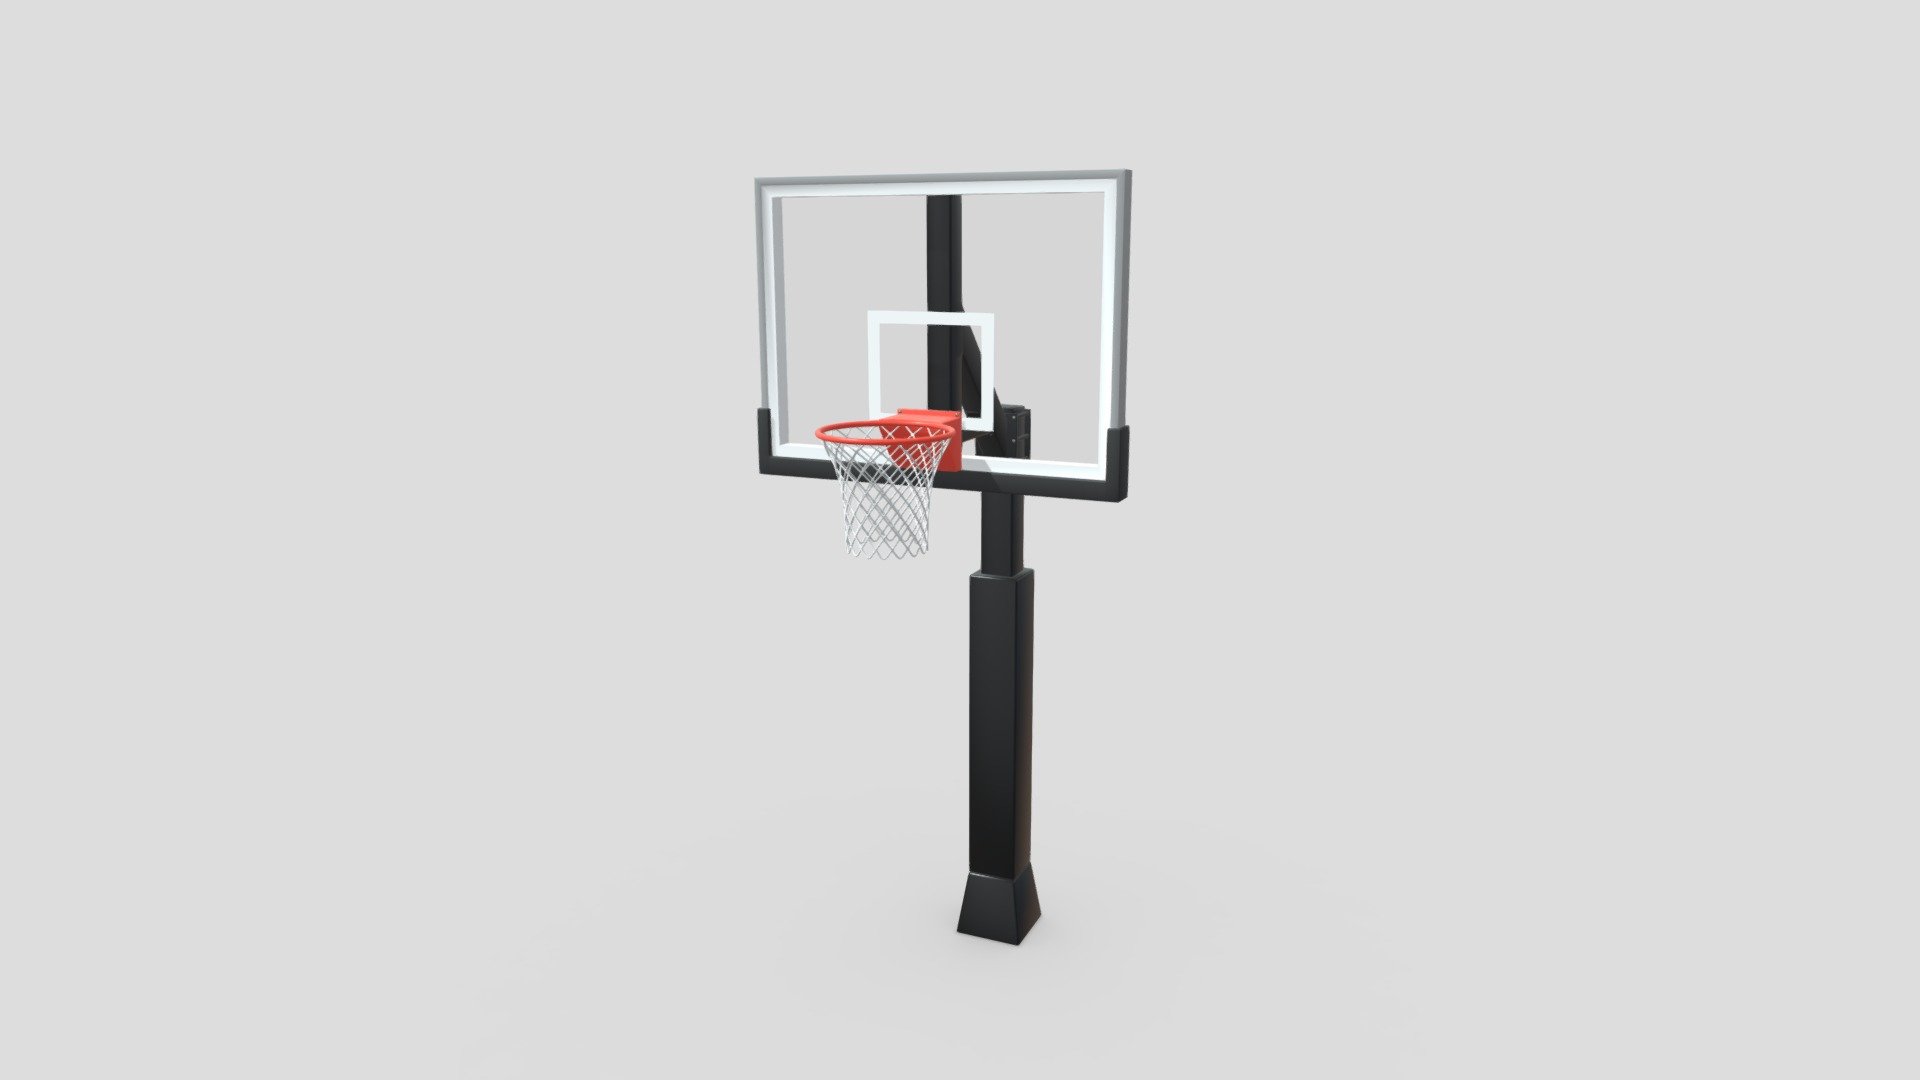 Basketball net 3D model that I made using Blender. It uses a simple mesh for the hoop, the backboard is rectangular, and there are supports on the back.

Features:




Model uses the metalness workflow and 4K PBR textures in PNG format

Includes transparent (for glass) and non-transparent diffuse textures

Includes optional roughness, gloss, and normal maps to add net mesh detail

Model has been manually UV unwrapped

Blend file includes pre-applied textures as well as camera setups and HDRi lighting

Model has been exported in 4 file formats (FBX, OBJ, GLTF/GLB, DAE/Collada)

Includes GLTF file type instructions and help document

Includes rendered images, wireframes, and extras

Included Textures:




AO, Diffuse, Diffuse(Alpha) Roughness, Gloss, Metallic, Normal, Transmission

UVLayout

The source file is uploaded in FBX format and is used for demonstration. In the additional file you will find all model exports and the textures that go along with them 3d model